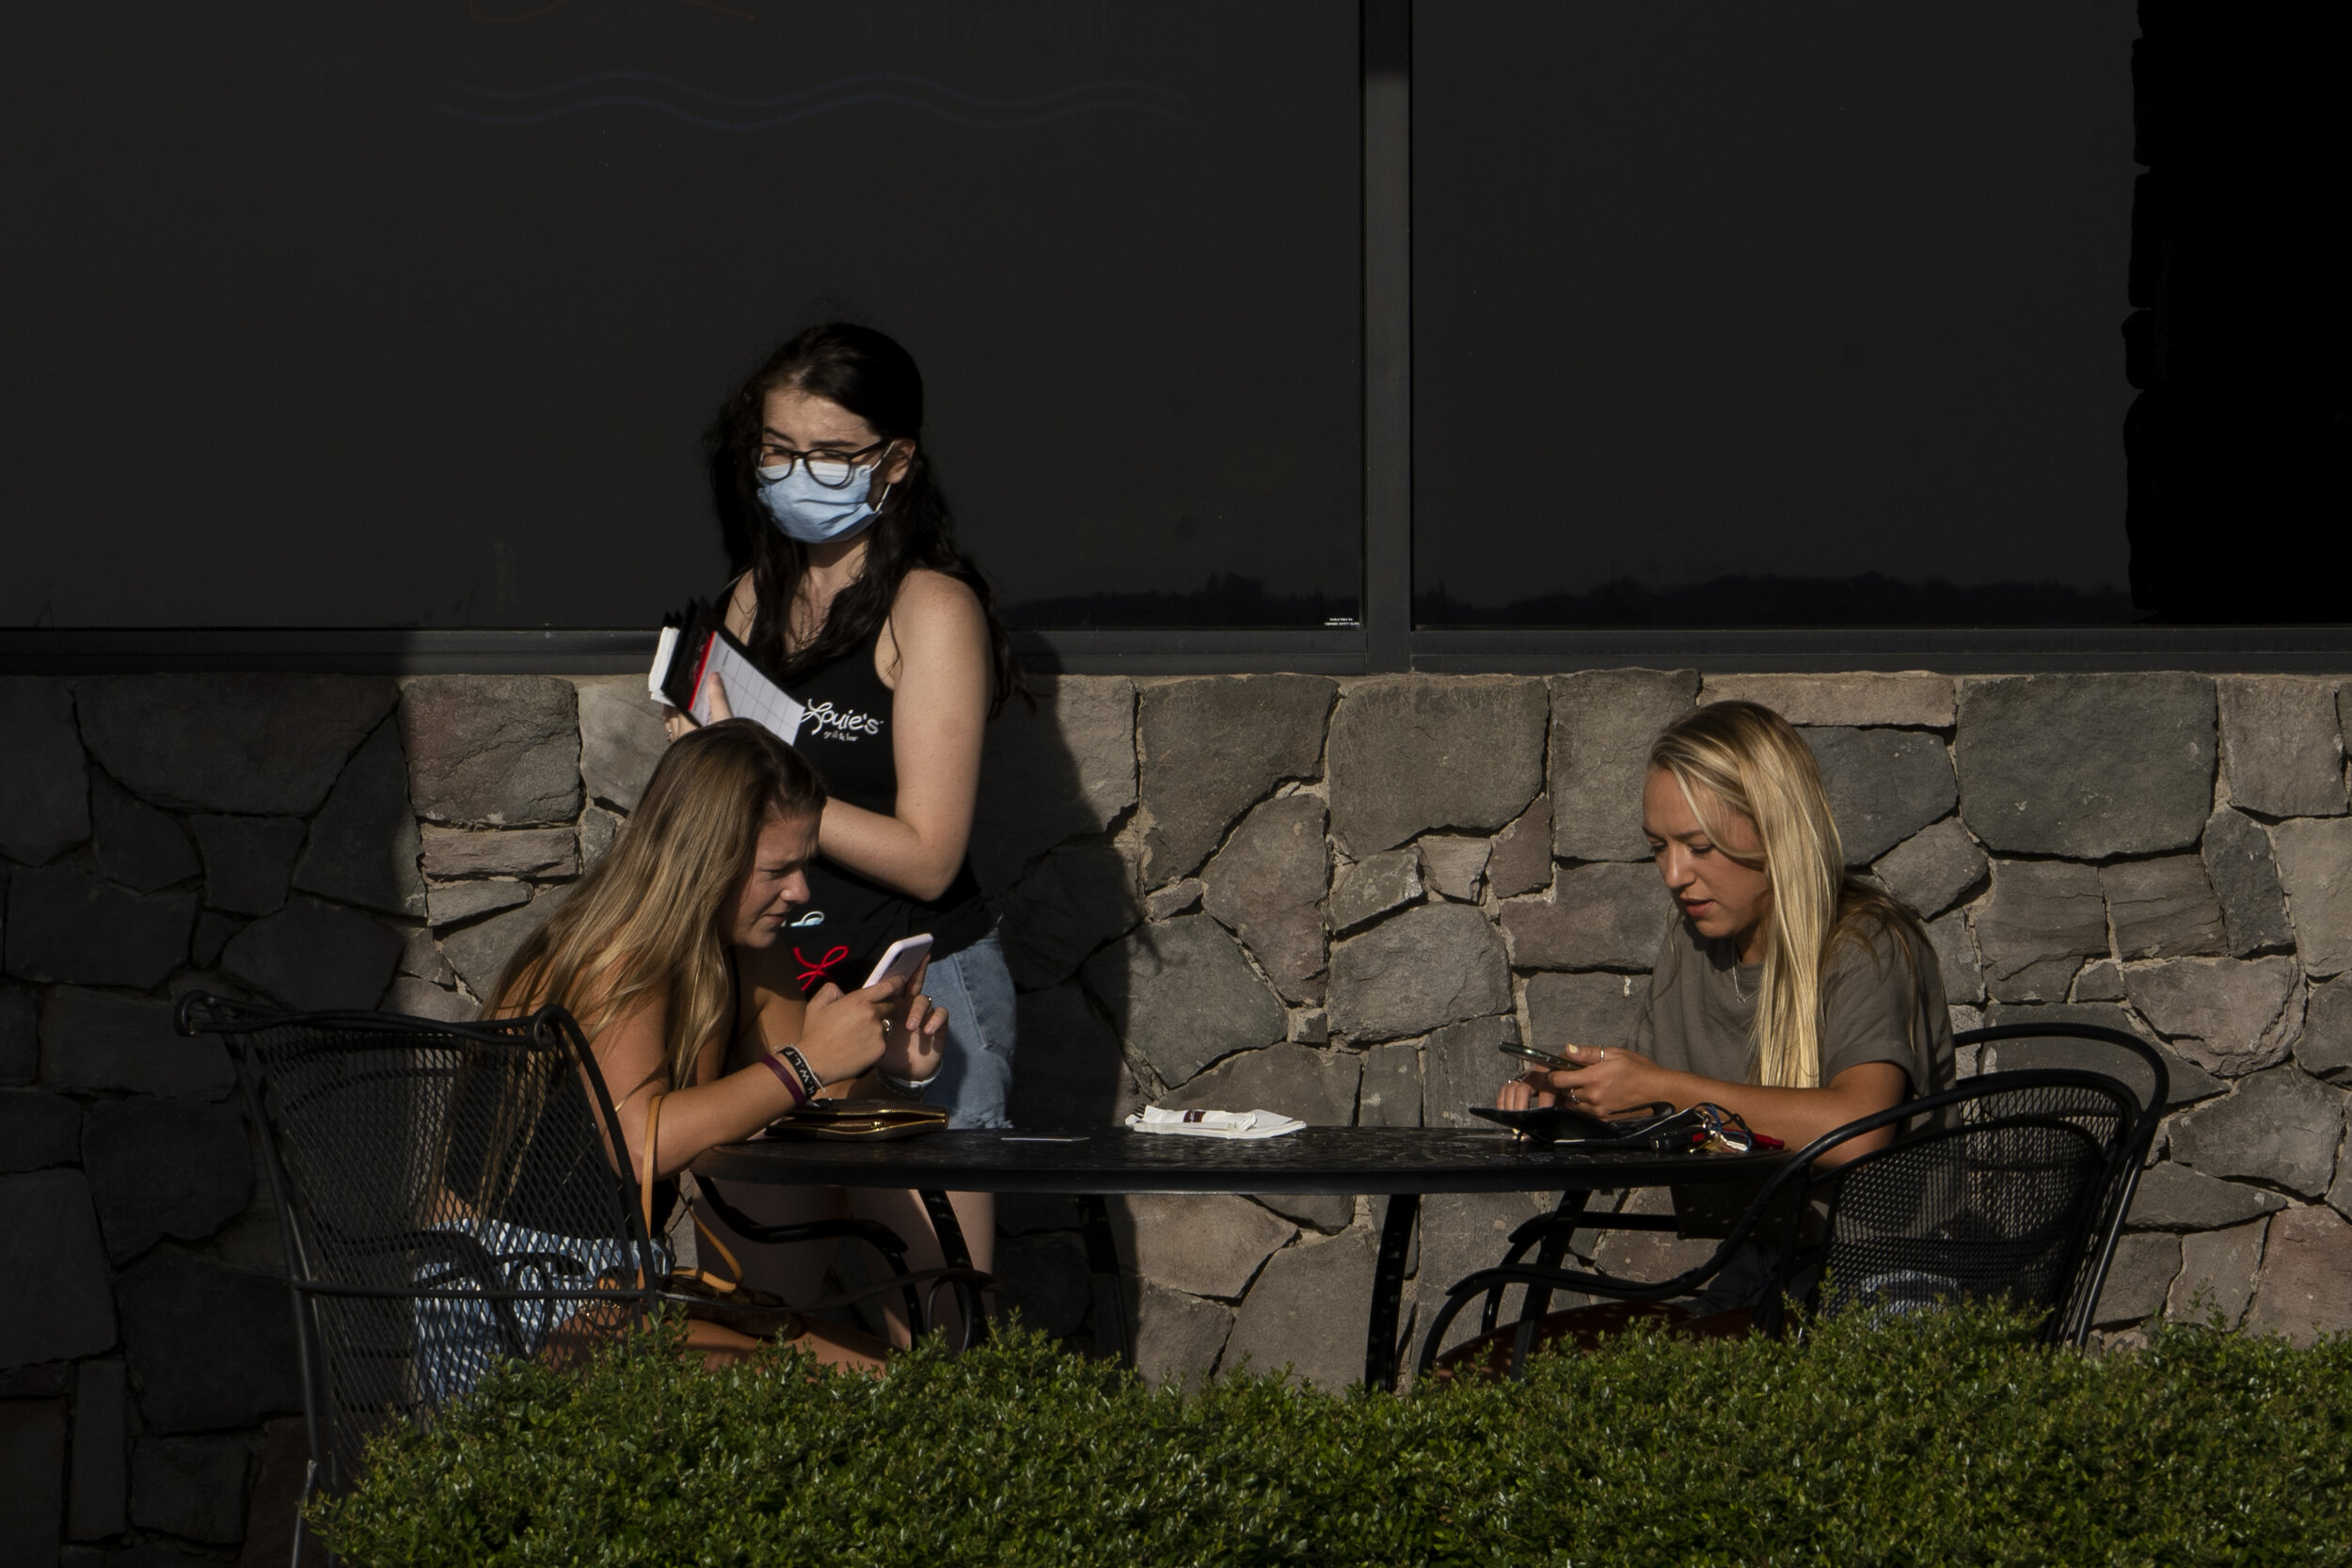  A waitress wearing a protective mask walks past customers on the patio at Louie's Grill and Bar at Lake Hefner in Oklahoma City, Oklahoma on Sunday July 19, 2020. Nick Oxford for The New York Times 